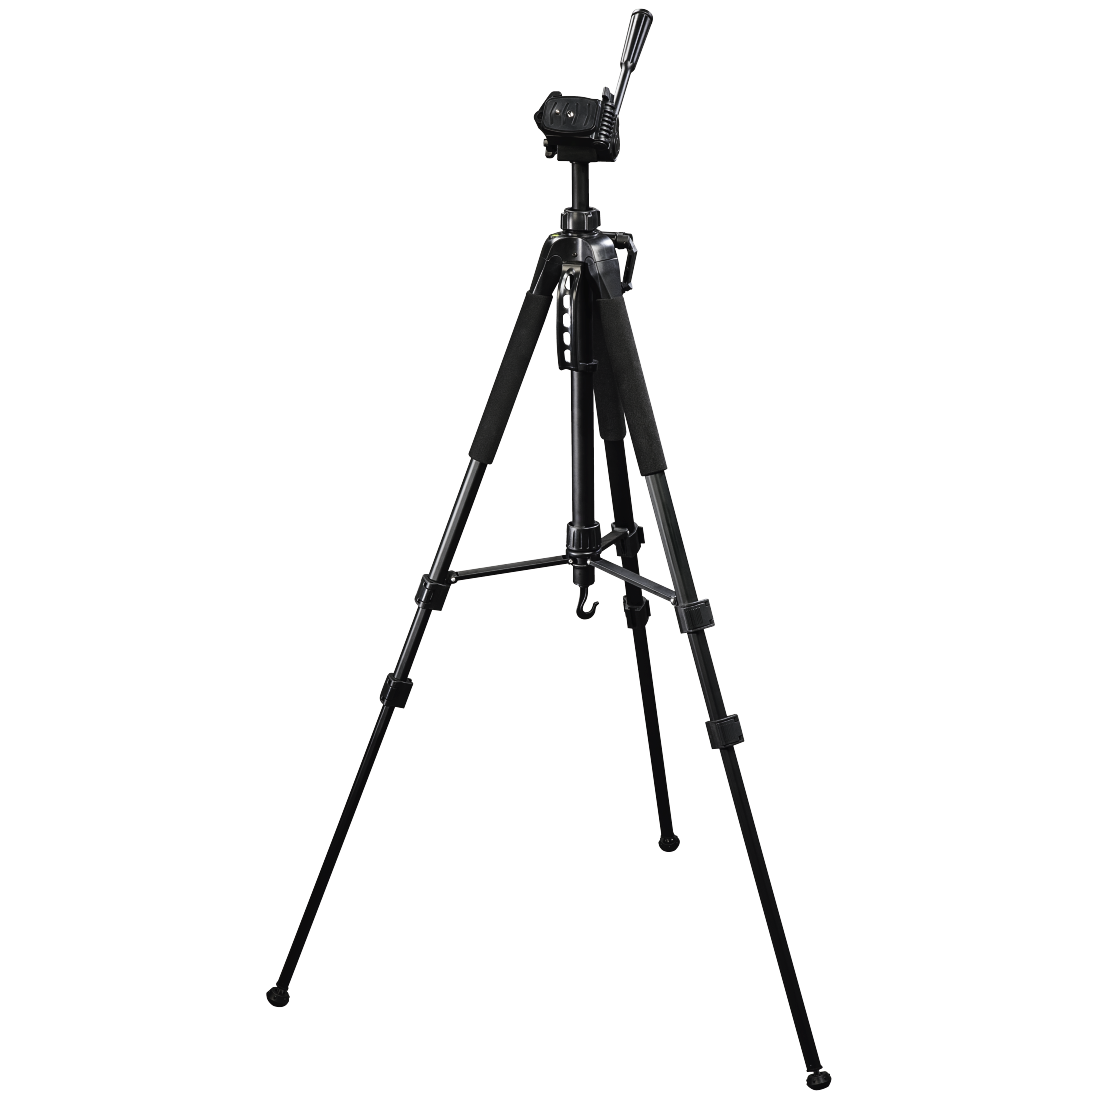 00004095 Hama "Action 165 3D" Tripod with 3-Way Head and Spikes, height:  165 cm | hama.com